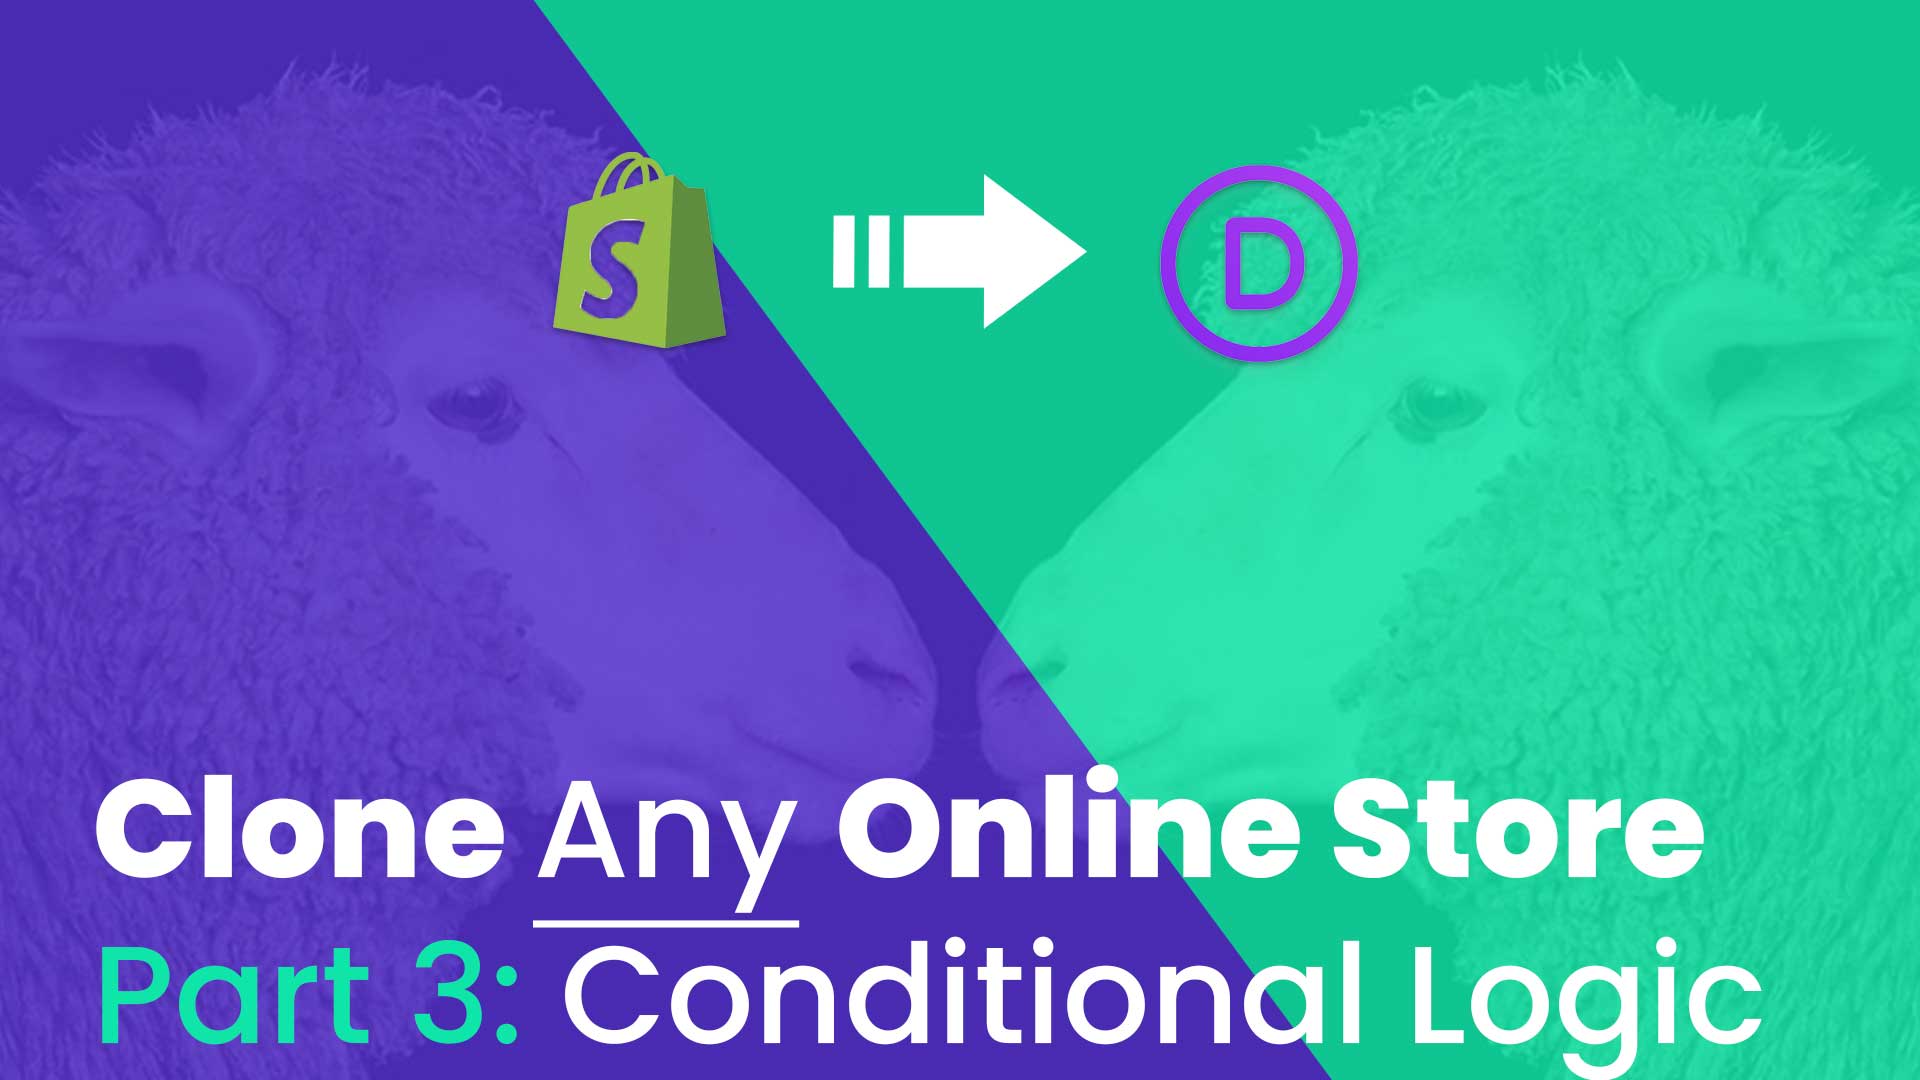 Clone Any Online Store Tutorial Series: Part 3 - Adding Conditional Logic